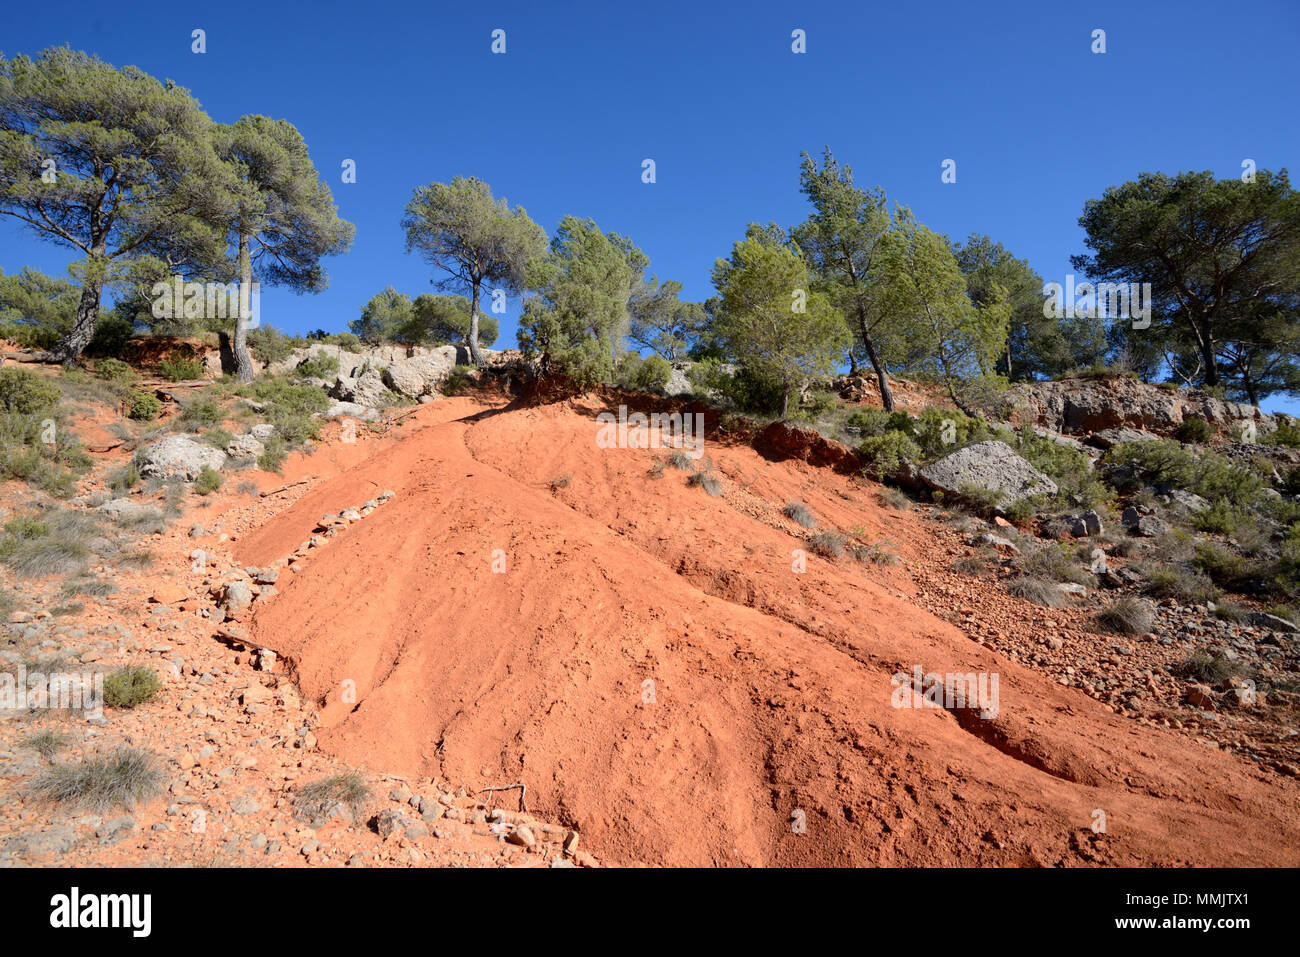 Ochre or Ocher Outcrops on the Lower Slopes of the Sainte-Victoire Mountain near Aix-en-Provence Provence France Stock Photo